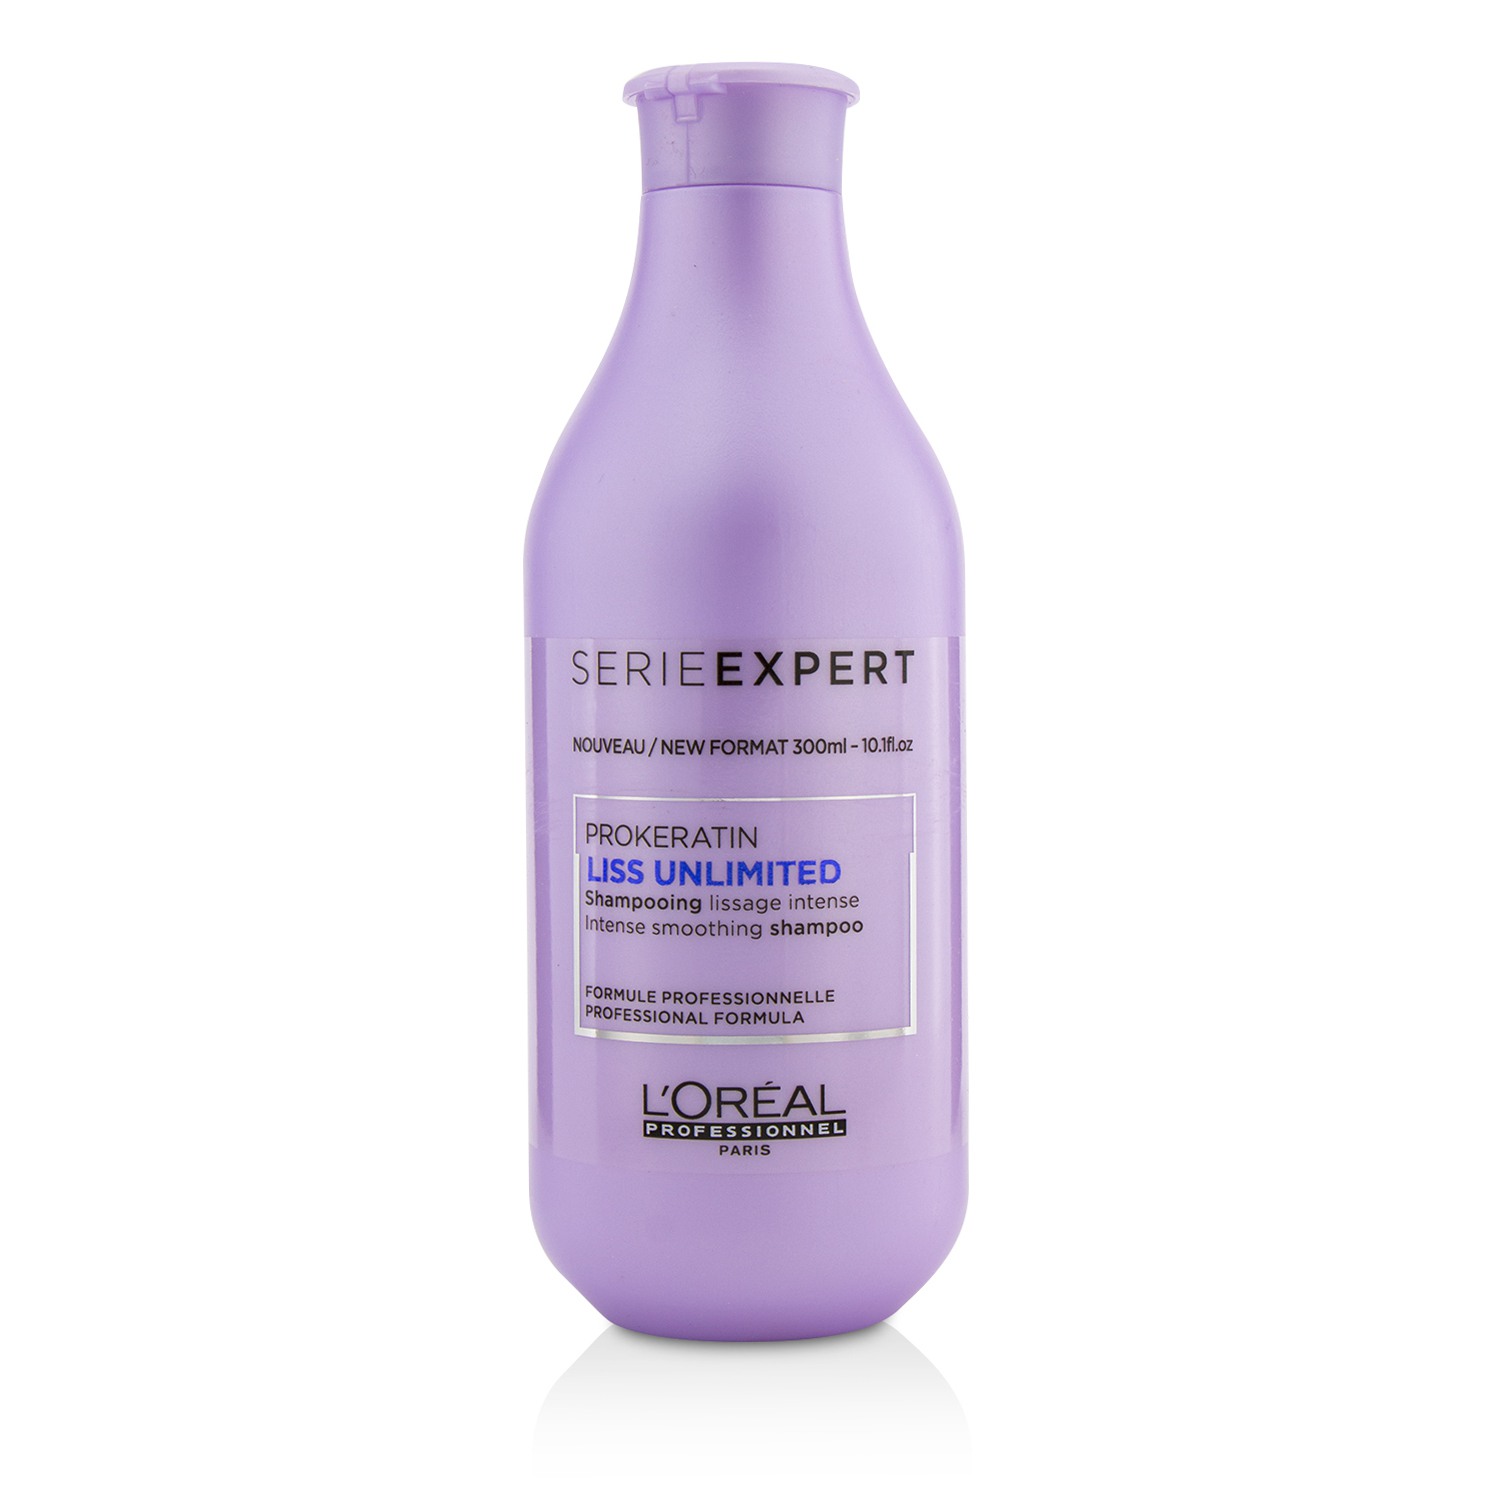 Professionnel Serie Expert - Liss Unlimited Prokeratin Intense Smoothing Shampoo LOreal Image